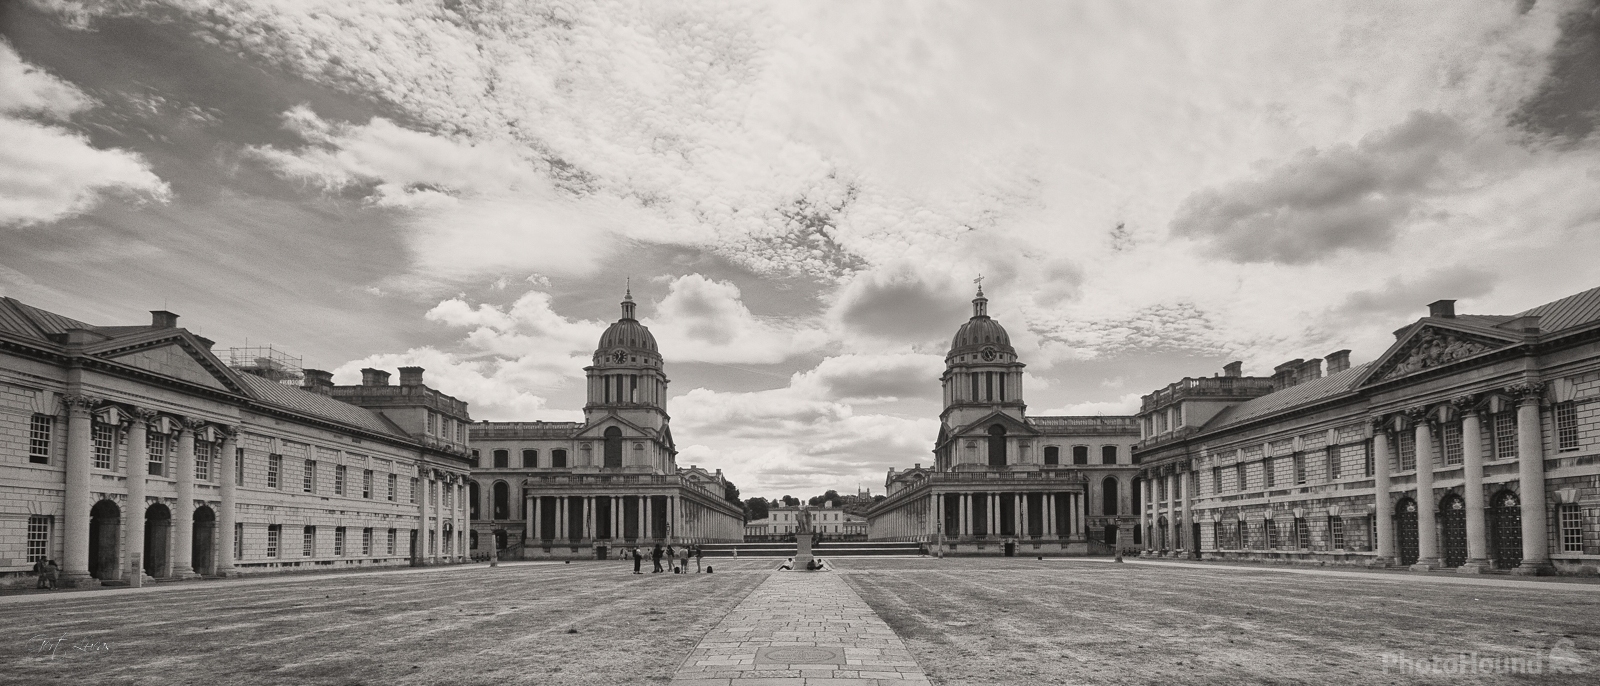 Image of The Old Royal Naval College, Greenwich by Gert Lucas